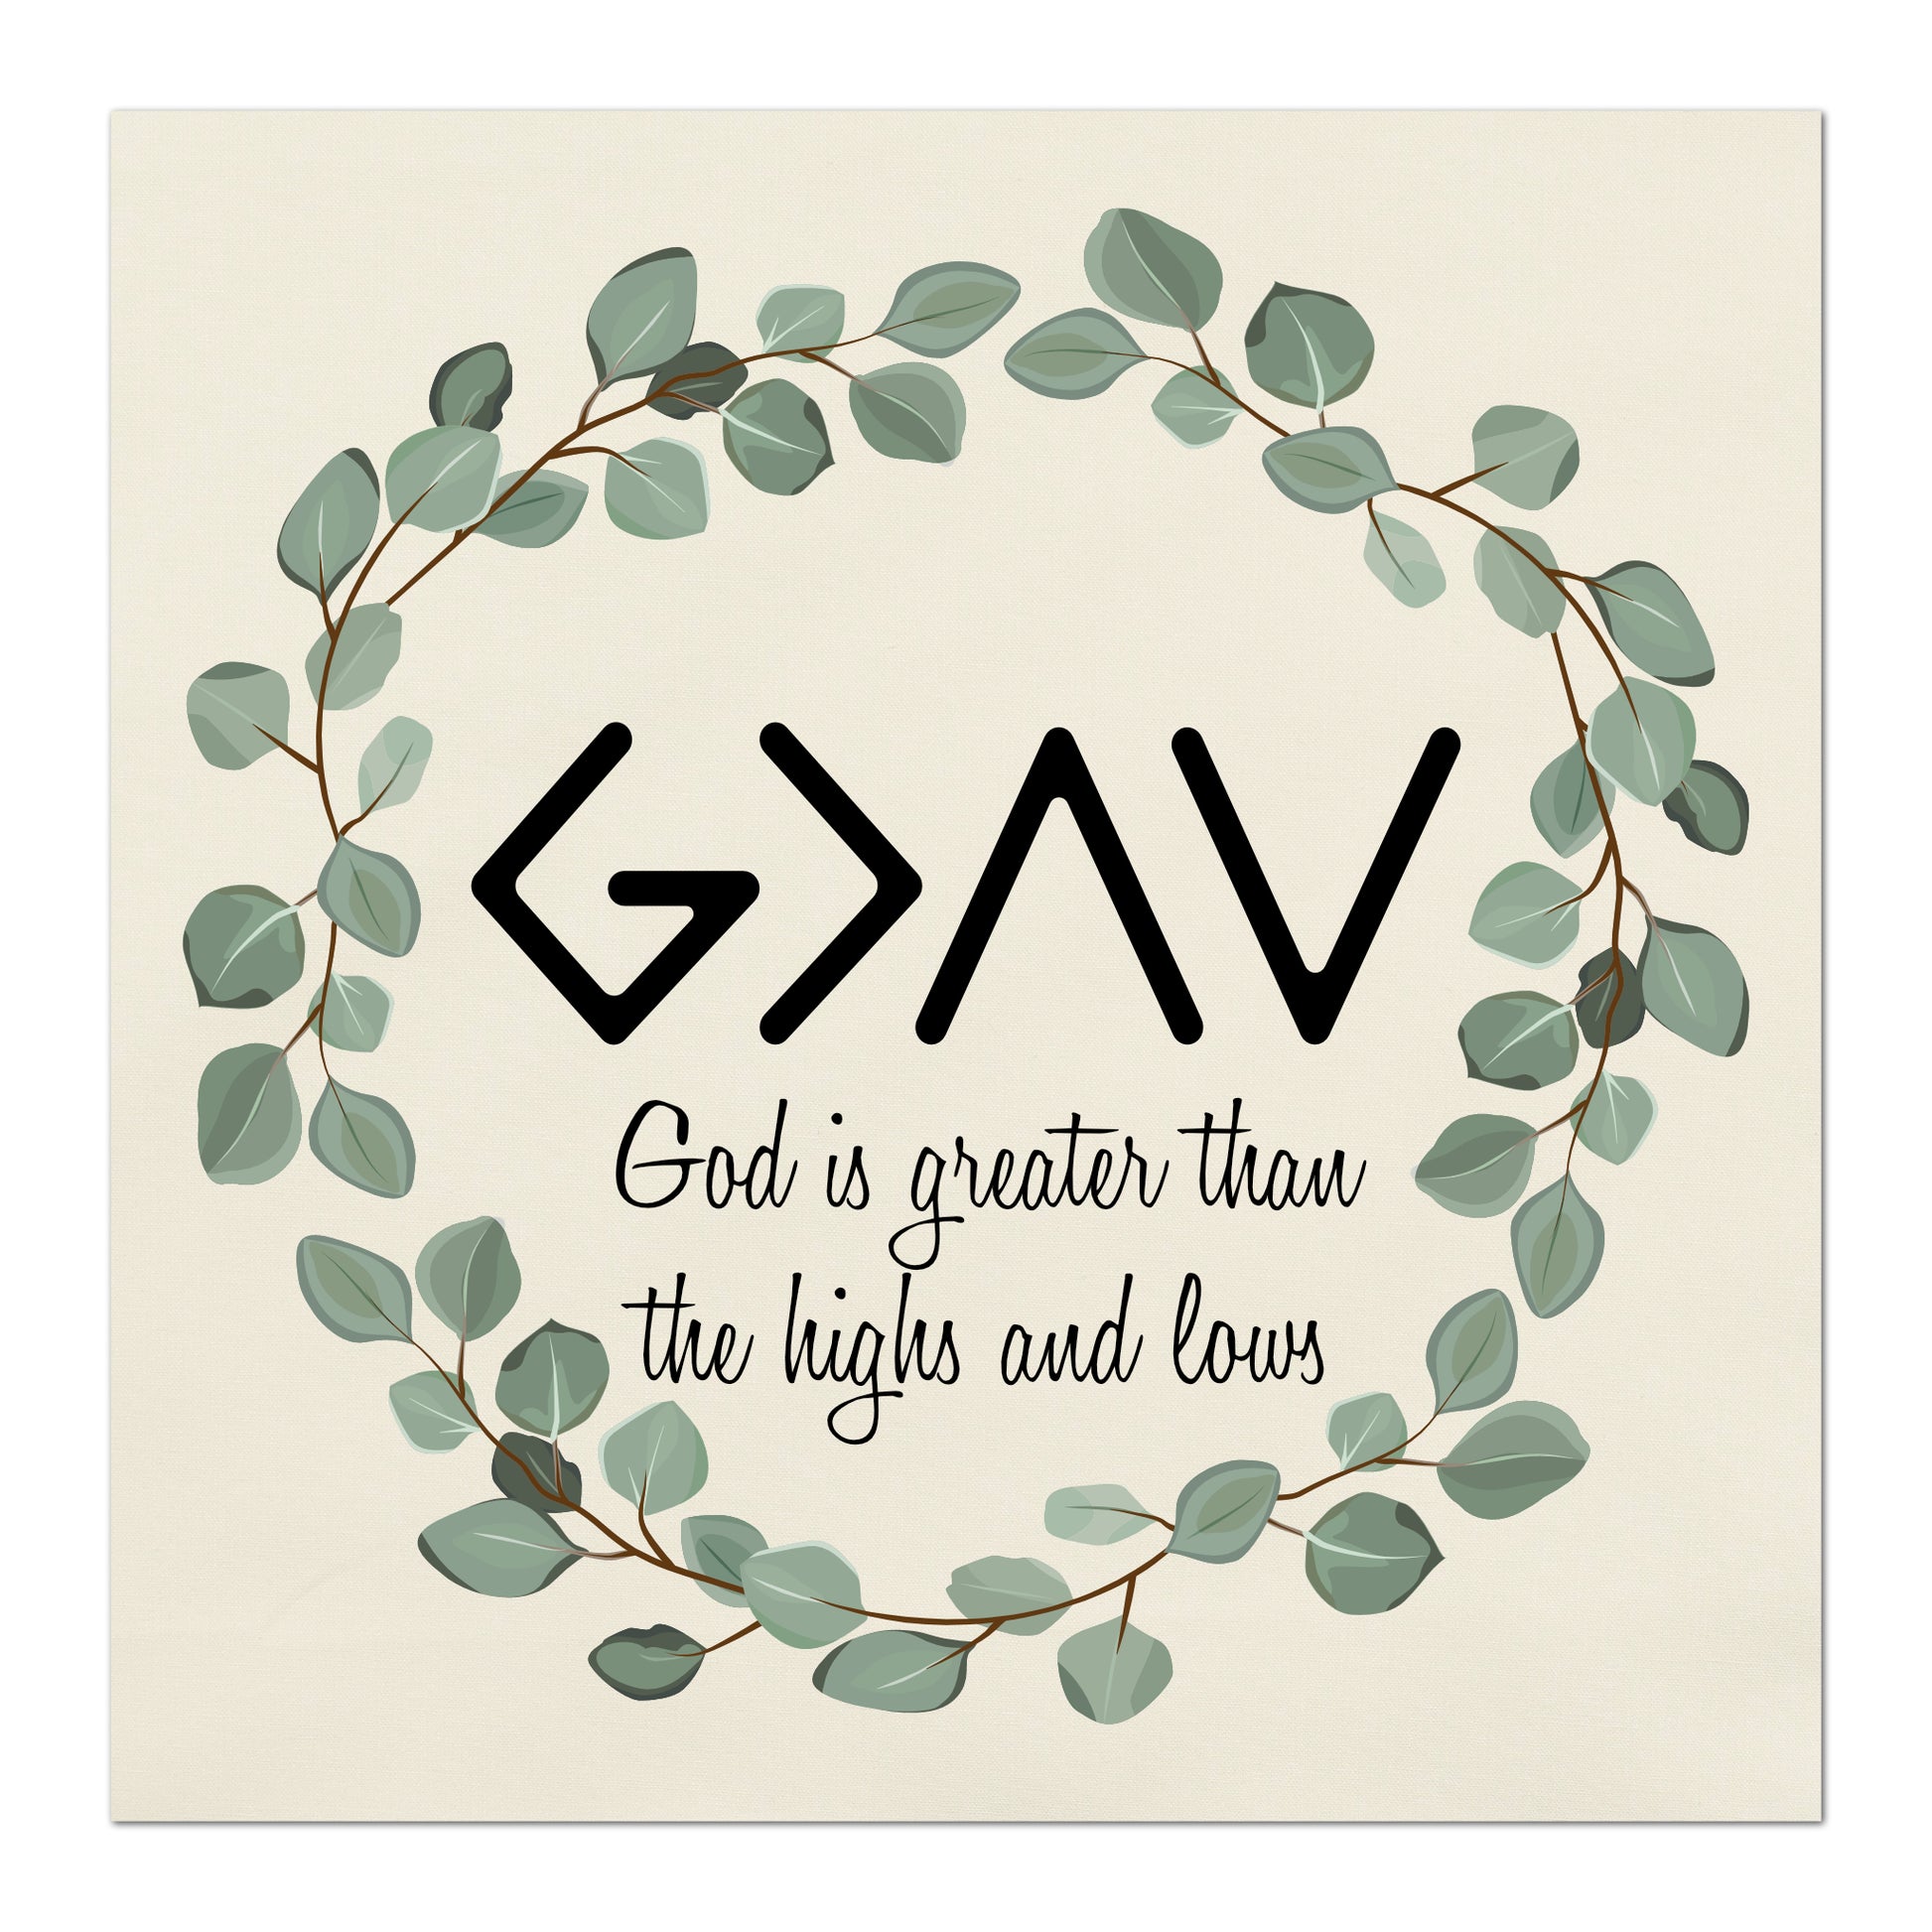 God is Greater than the Highs and Lows - Religious Fabric, Christian, Quilt Block, Wall Art - Quilting, Crafts, Pillow, Towel